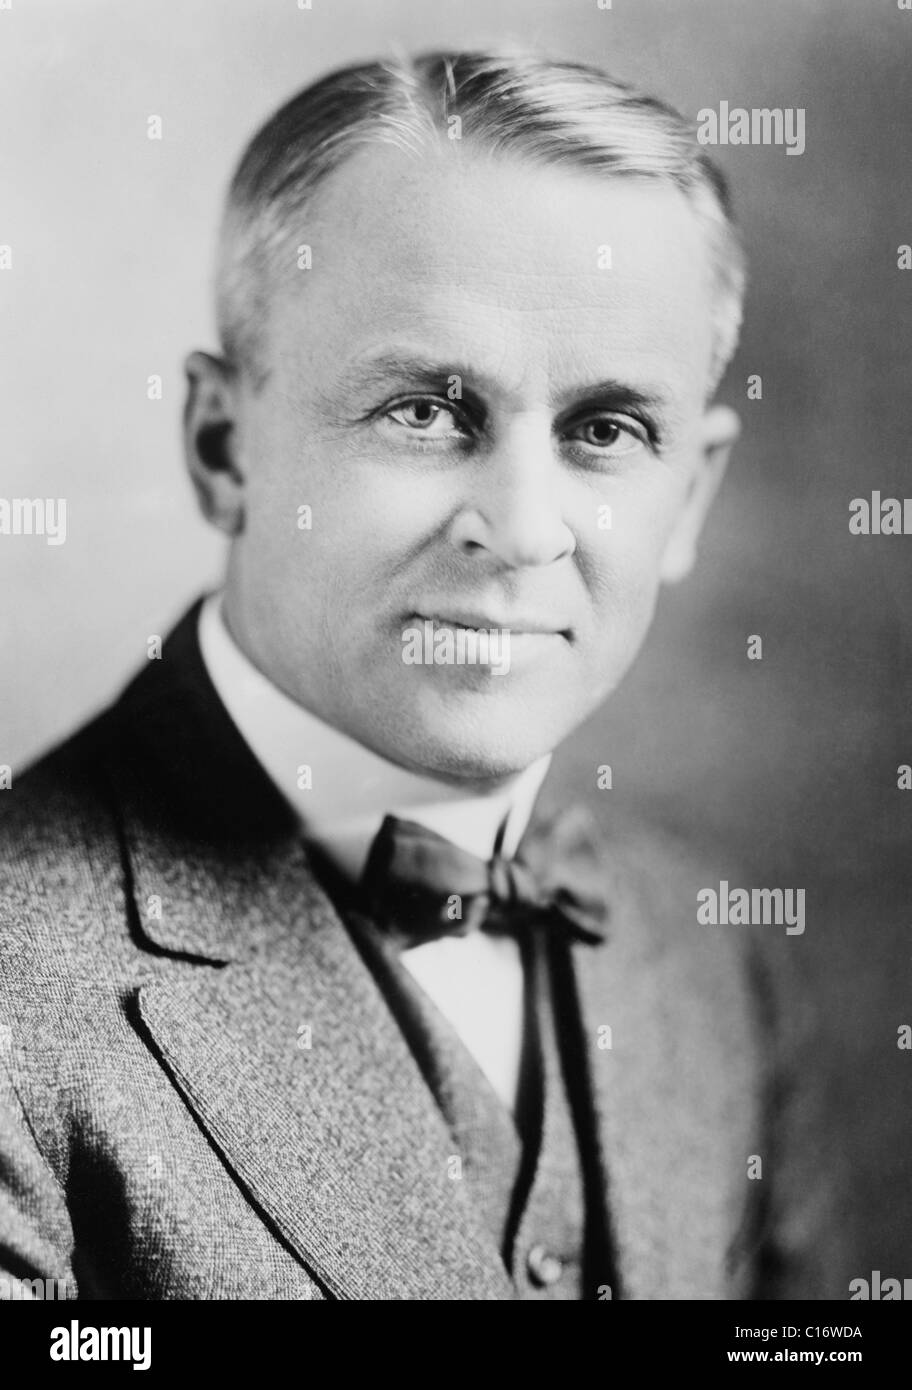 Vintage portrait photo circa 1910s of American physicist Robert A. Millikan (1868 - 1953) - winner of the Nobel Prize in Physics in 1923. Stock Photo